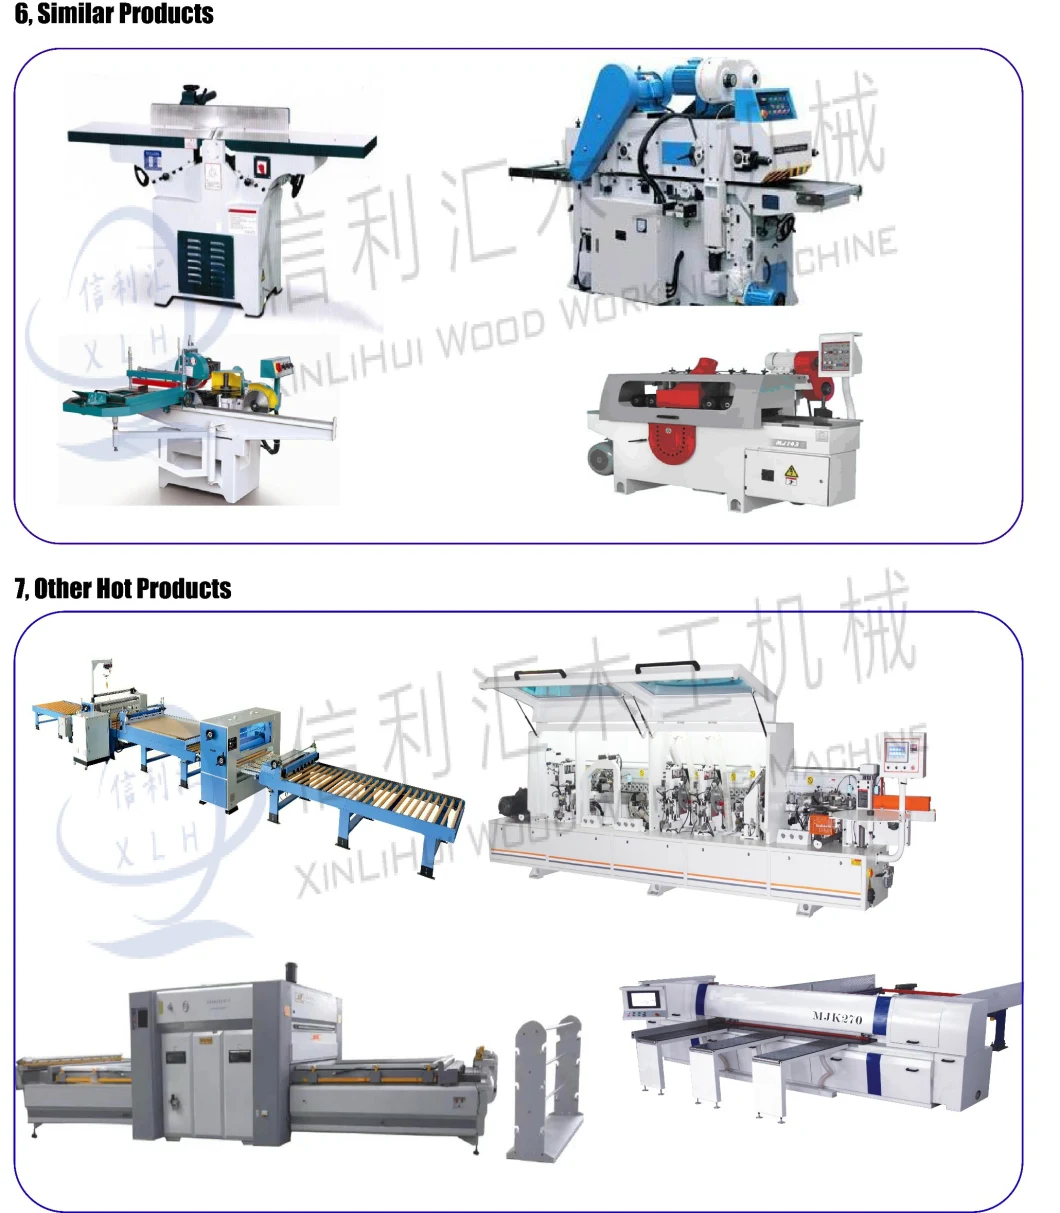 High Speed Monolithic Vertical Saw/Wood Multiple Rip Saw / Multi Rip Saw Machine/ Wood Multi Rip Saw Machine Wood Working Ripsaw Machine